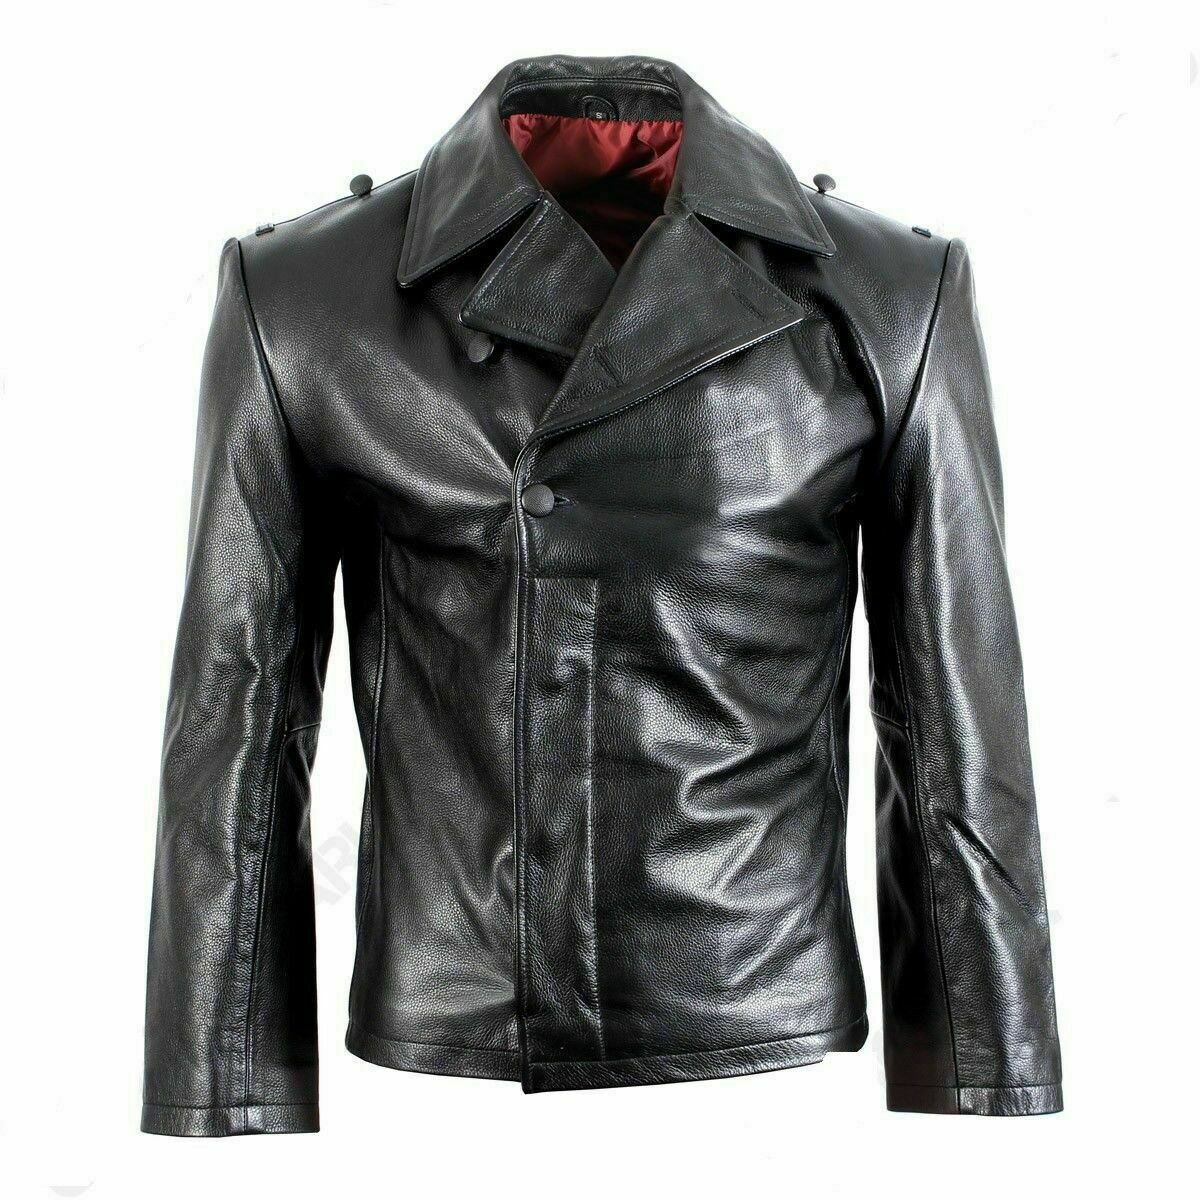 Special Blend - German black leather panzer/u-boat wrap - ww2 repro leather jacket